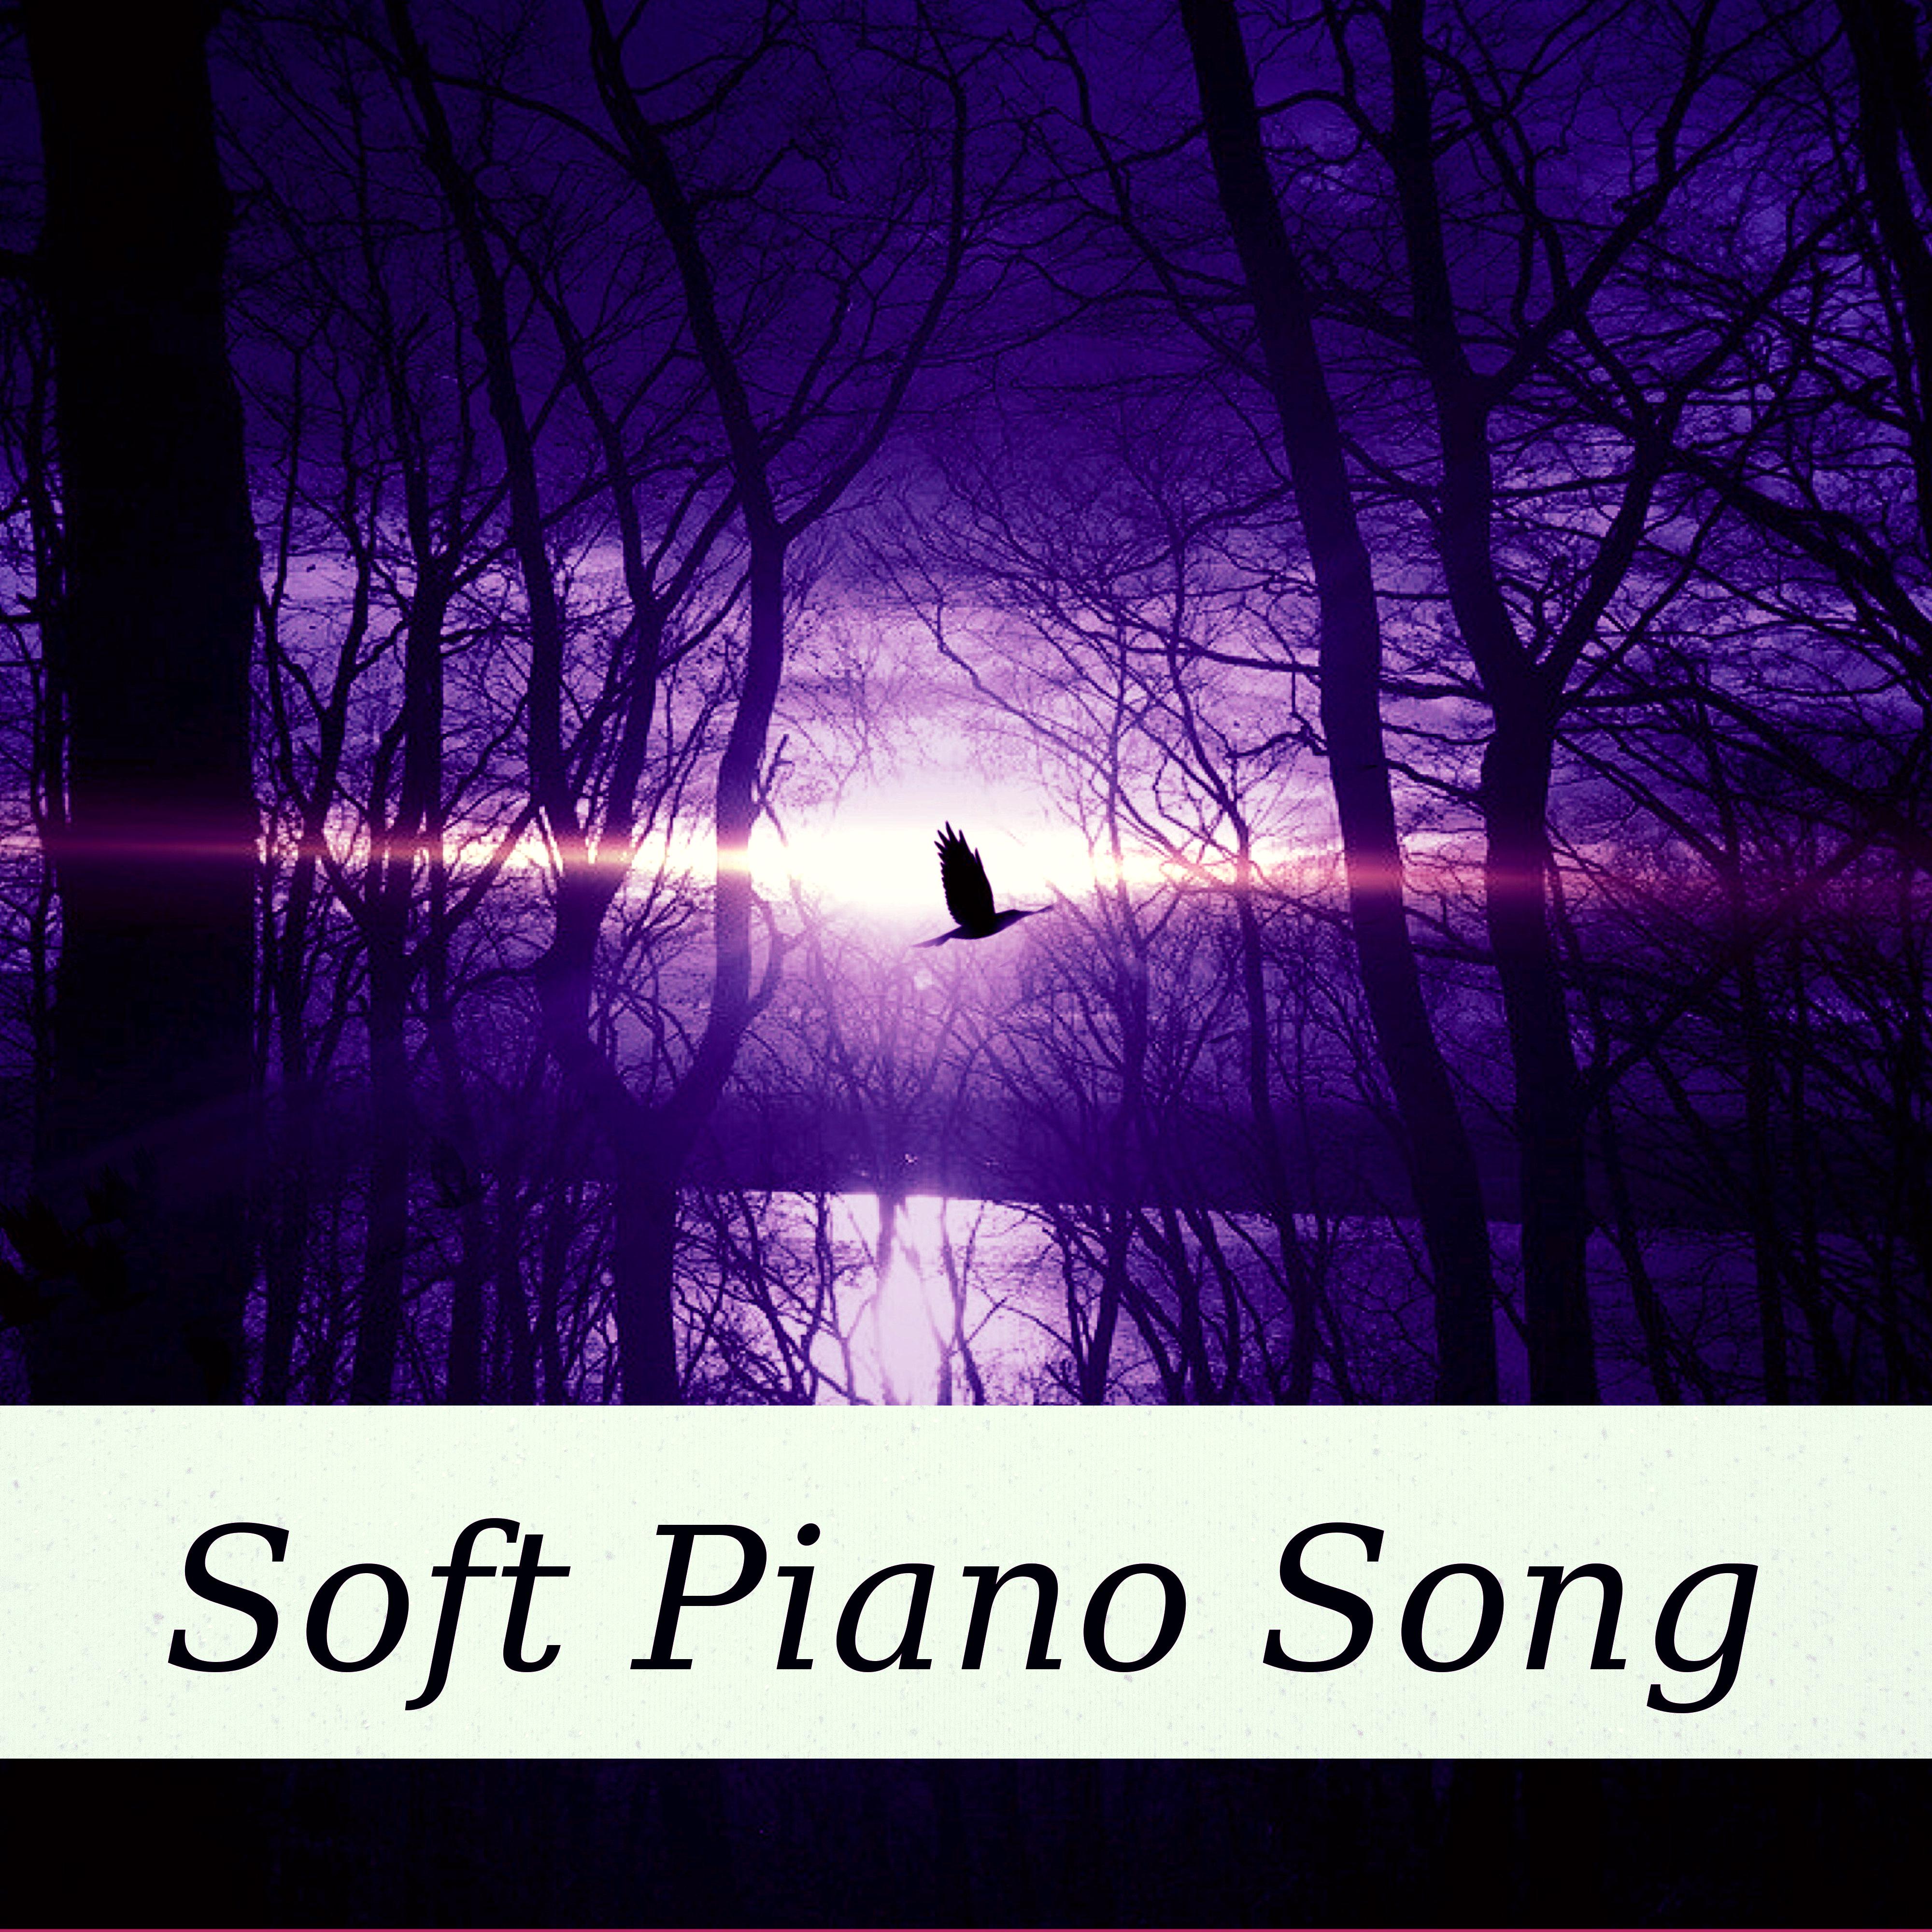 Soft Piano Song – Calm and Quiet Night, Relaxing Piano, Sleep Hypnosis, Soothe Your Soul, Bedtime Music